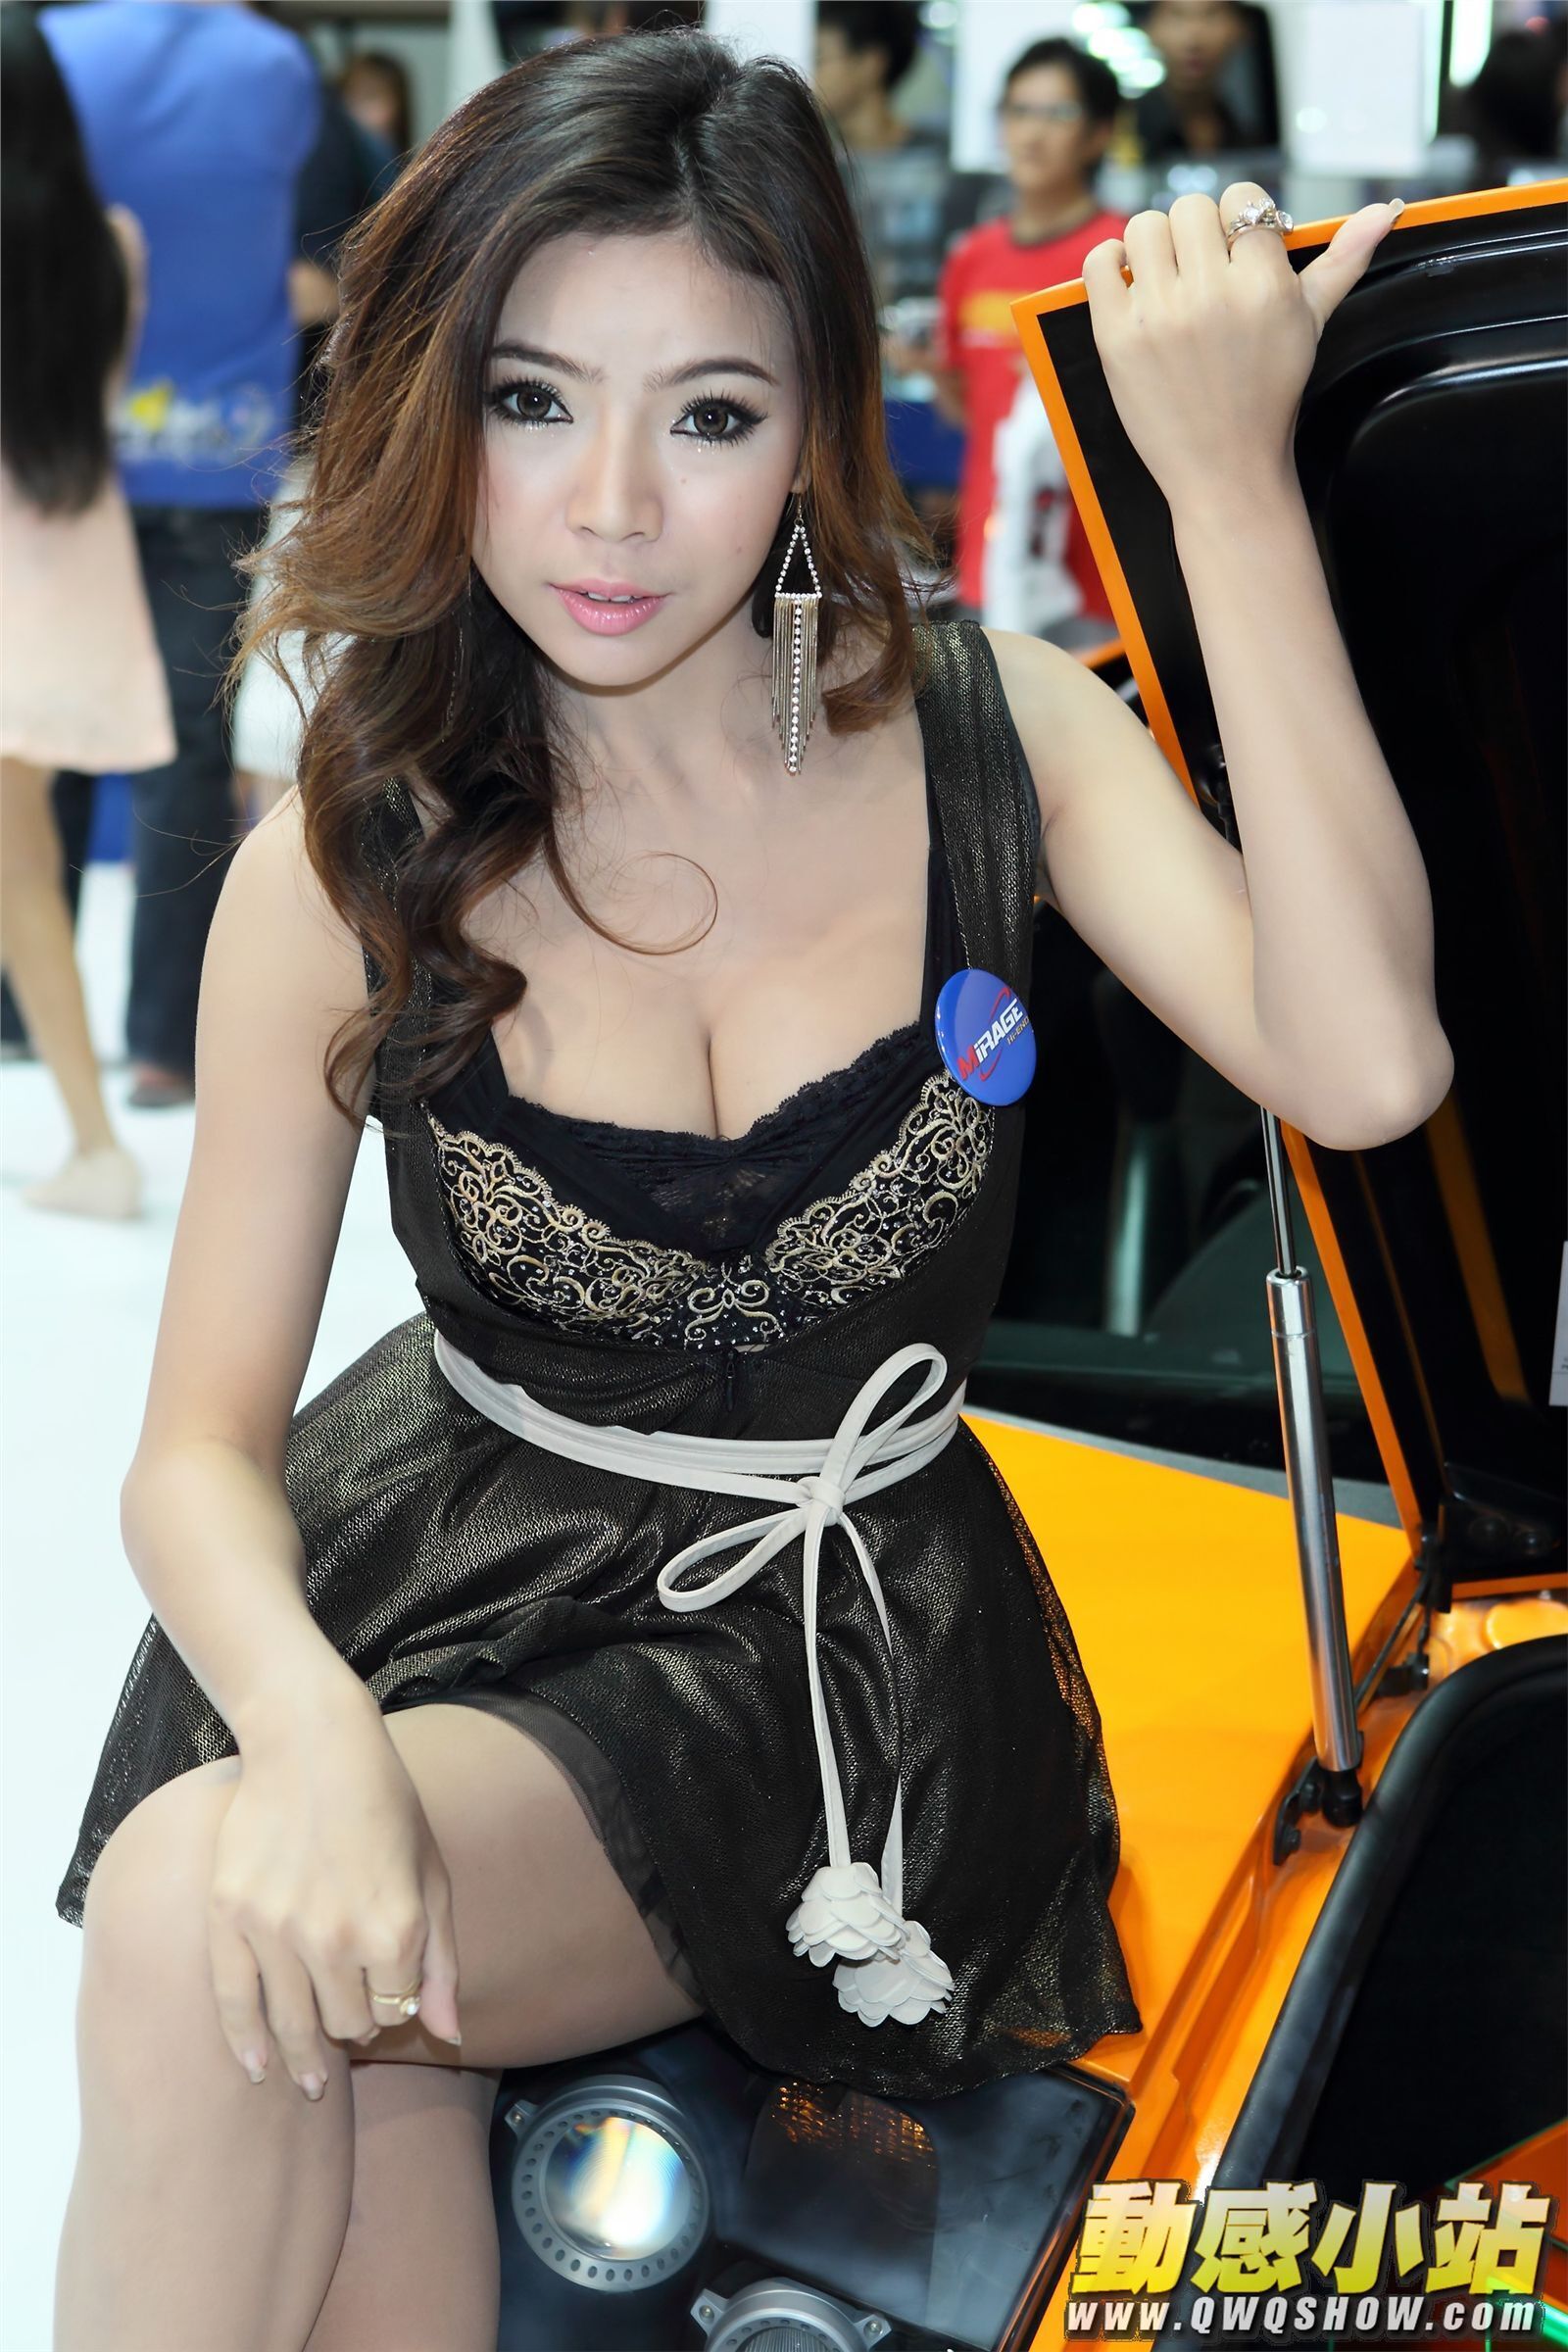 Show girl at 2012 Taiwan Adult Expo